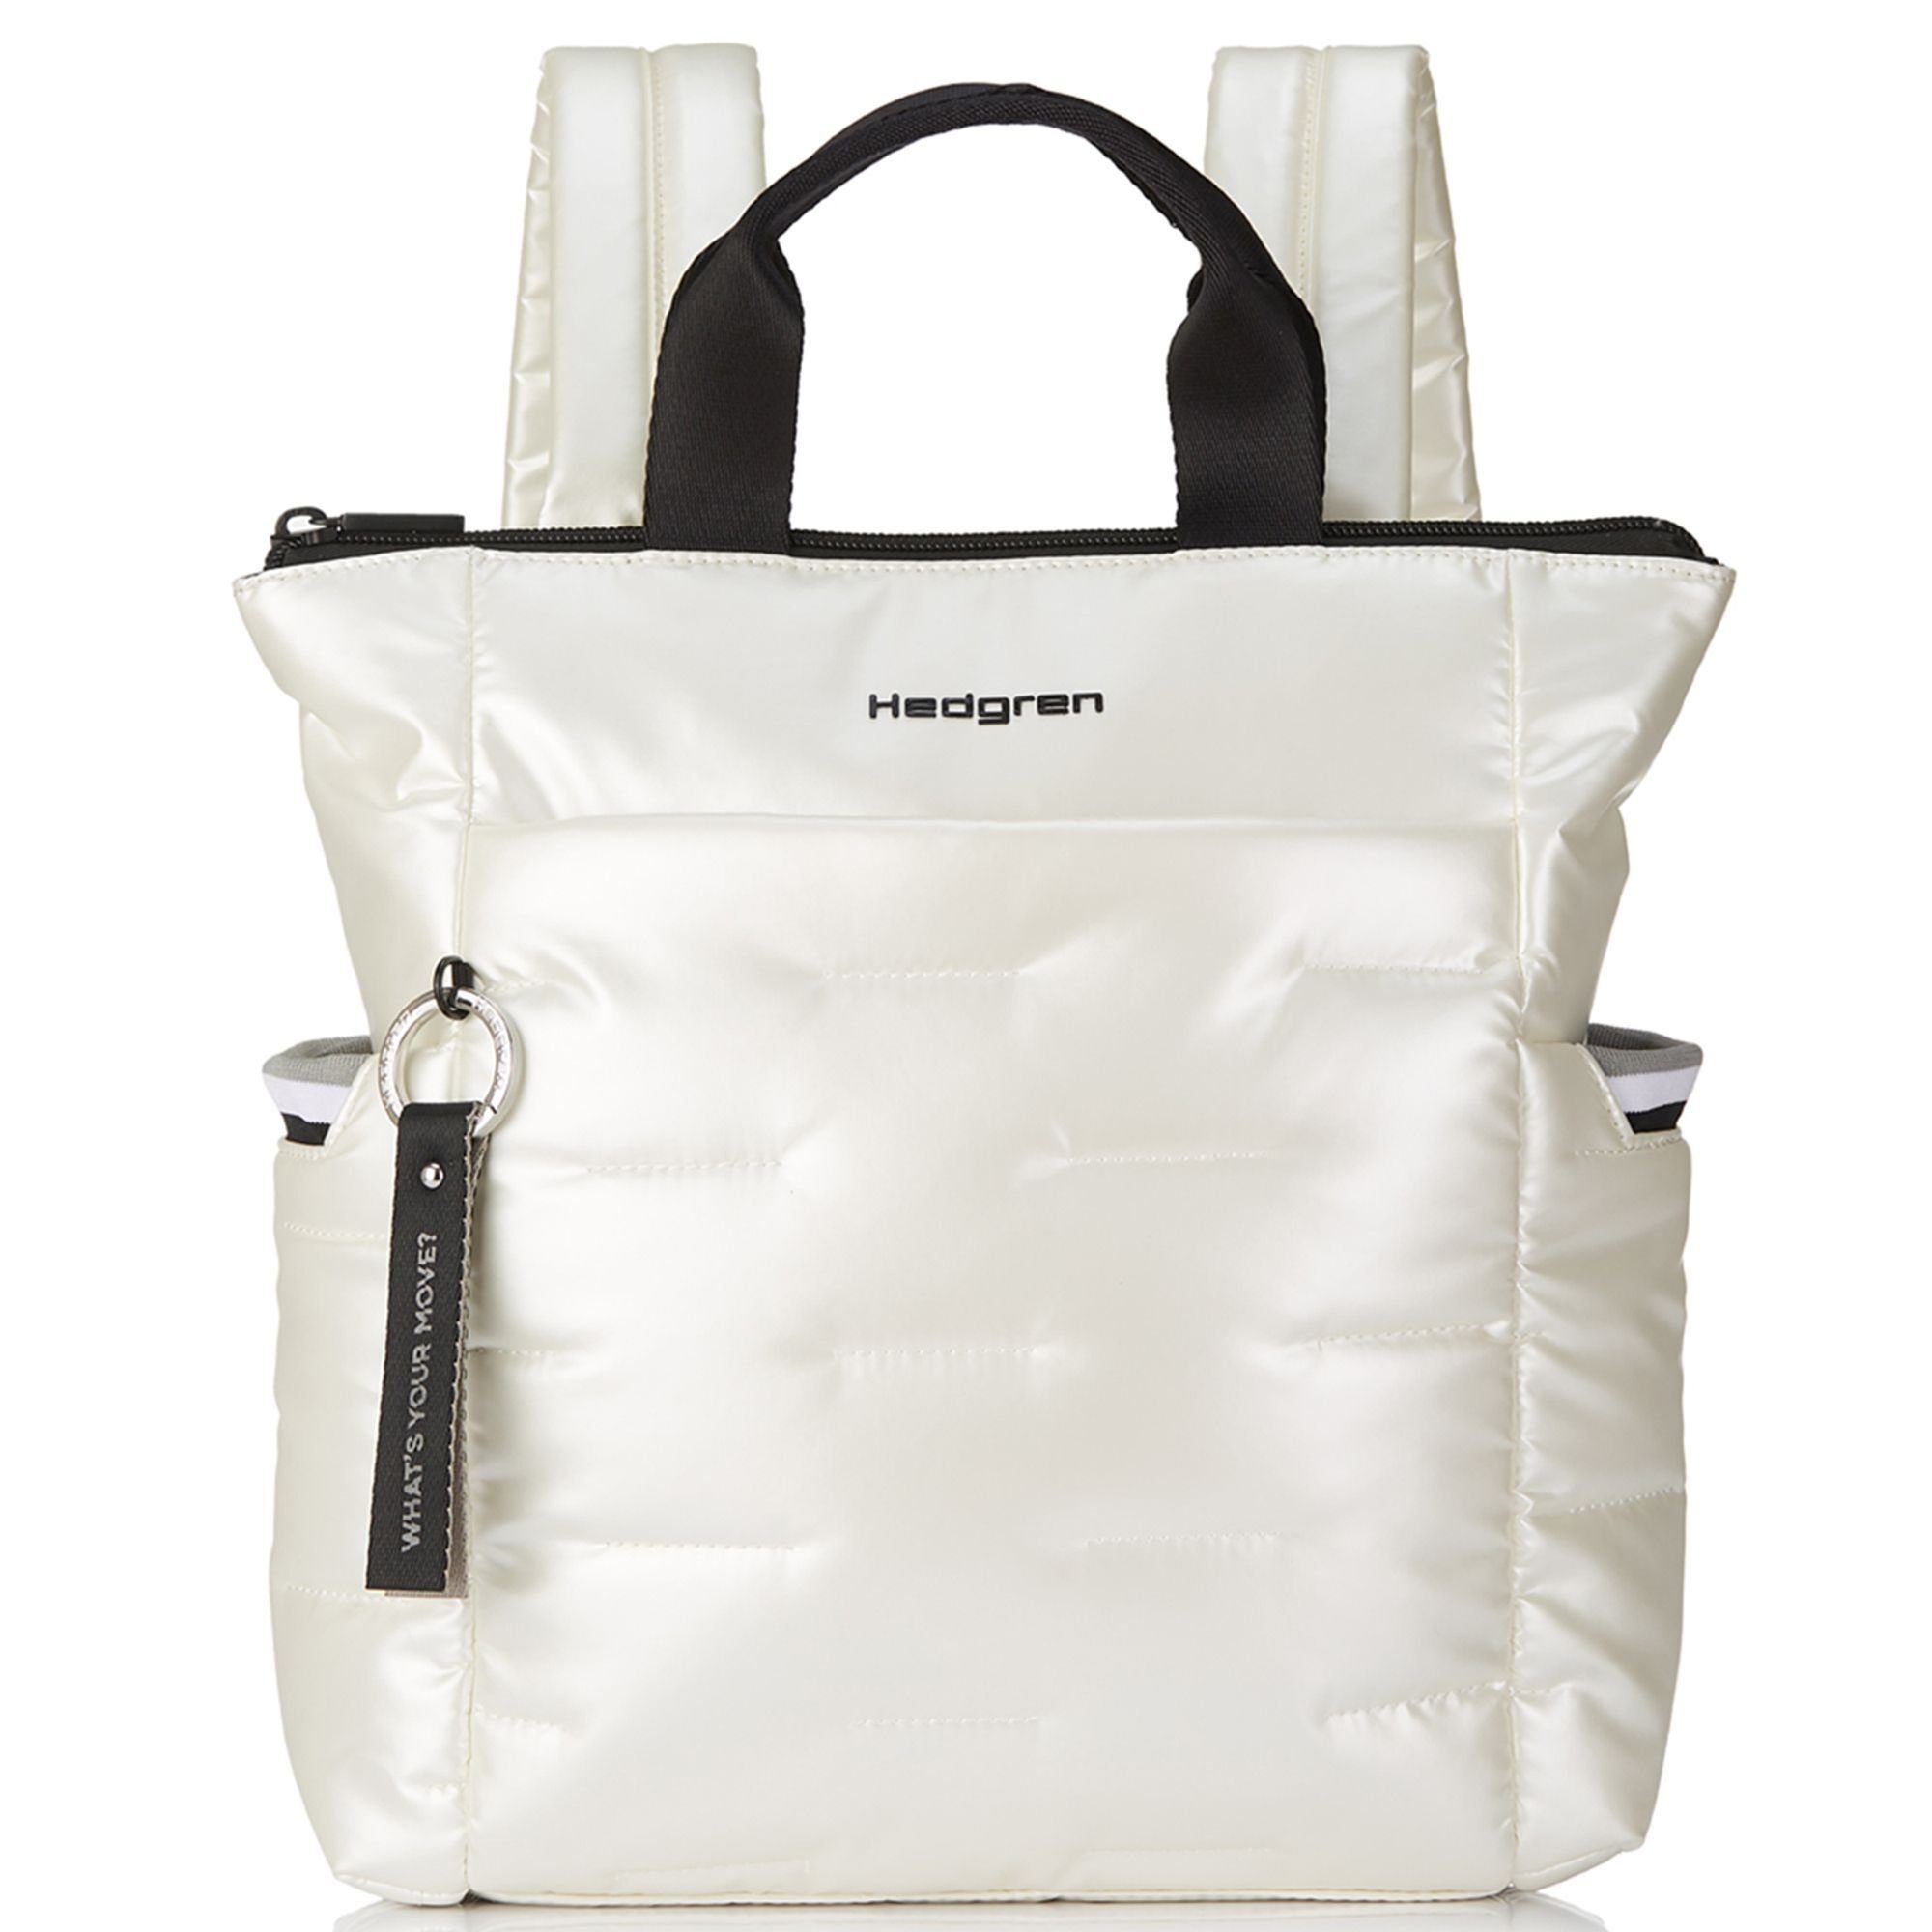 Hedgren Rucksack Cocoon, Polyester pearly white